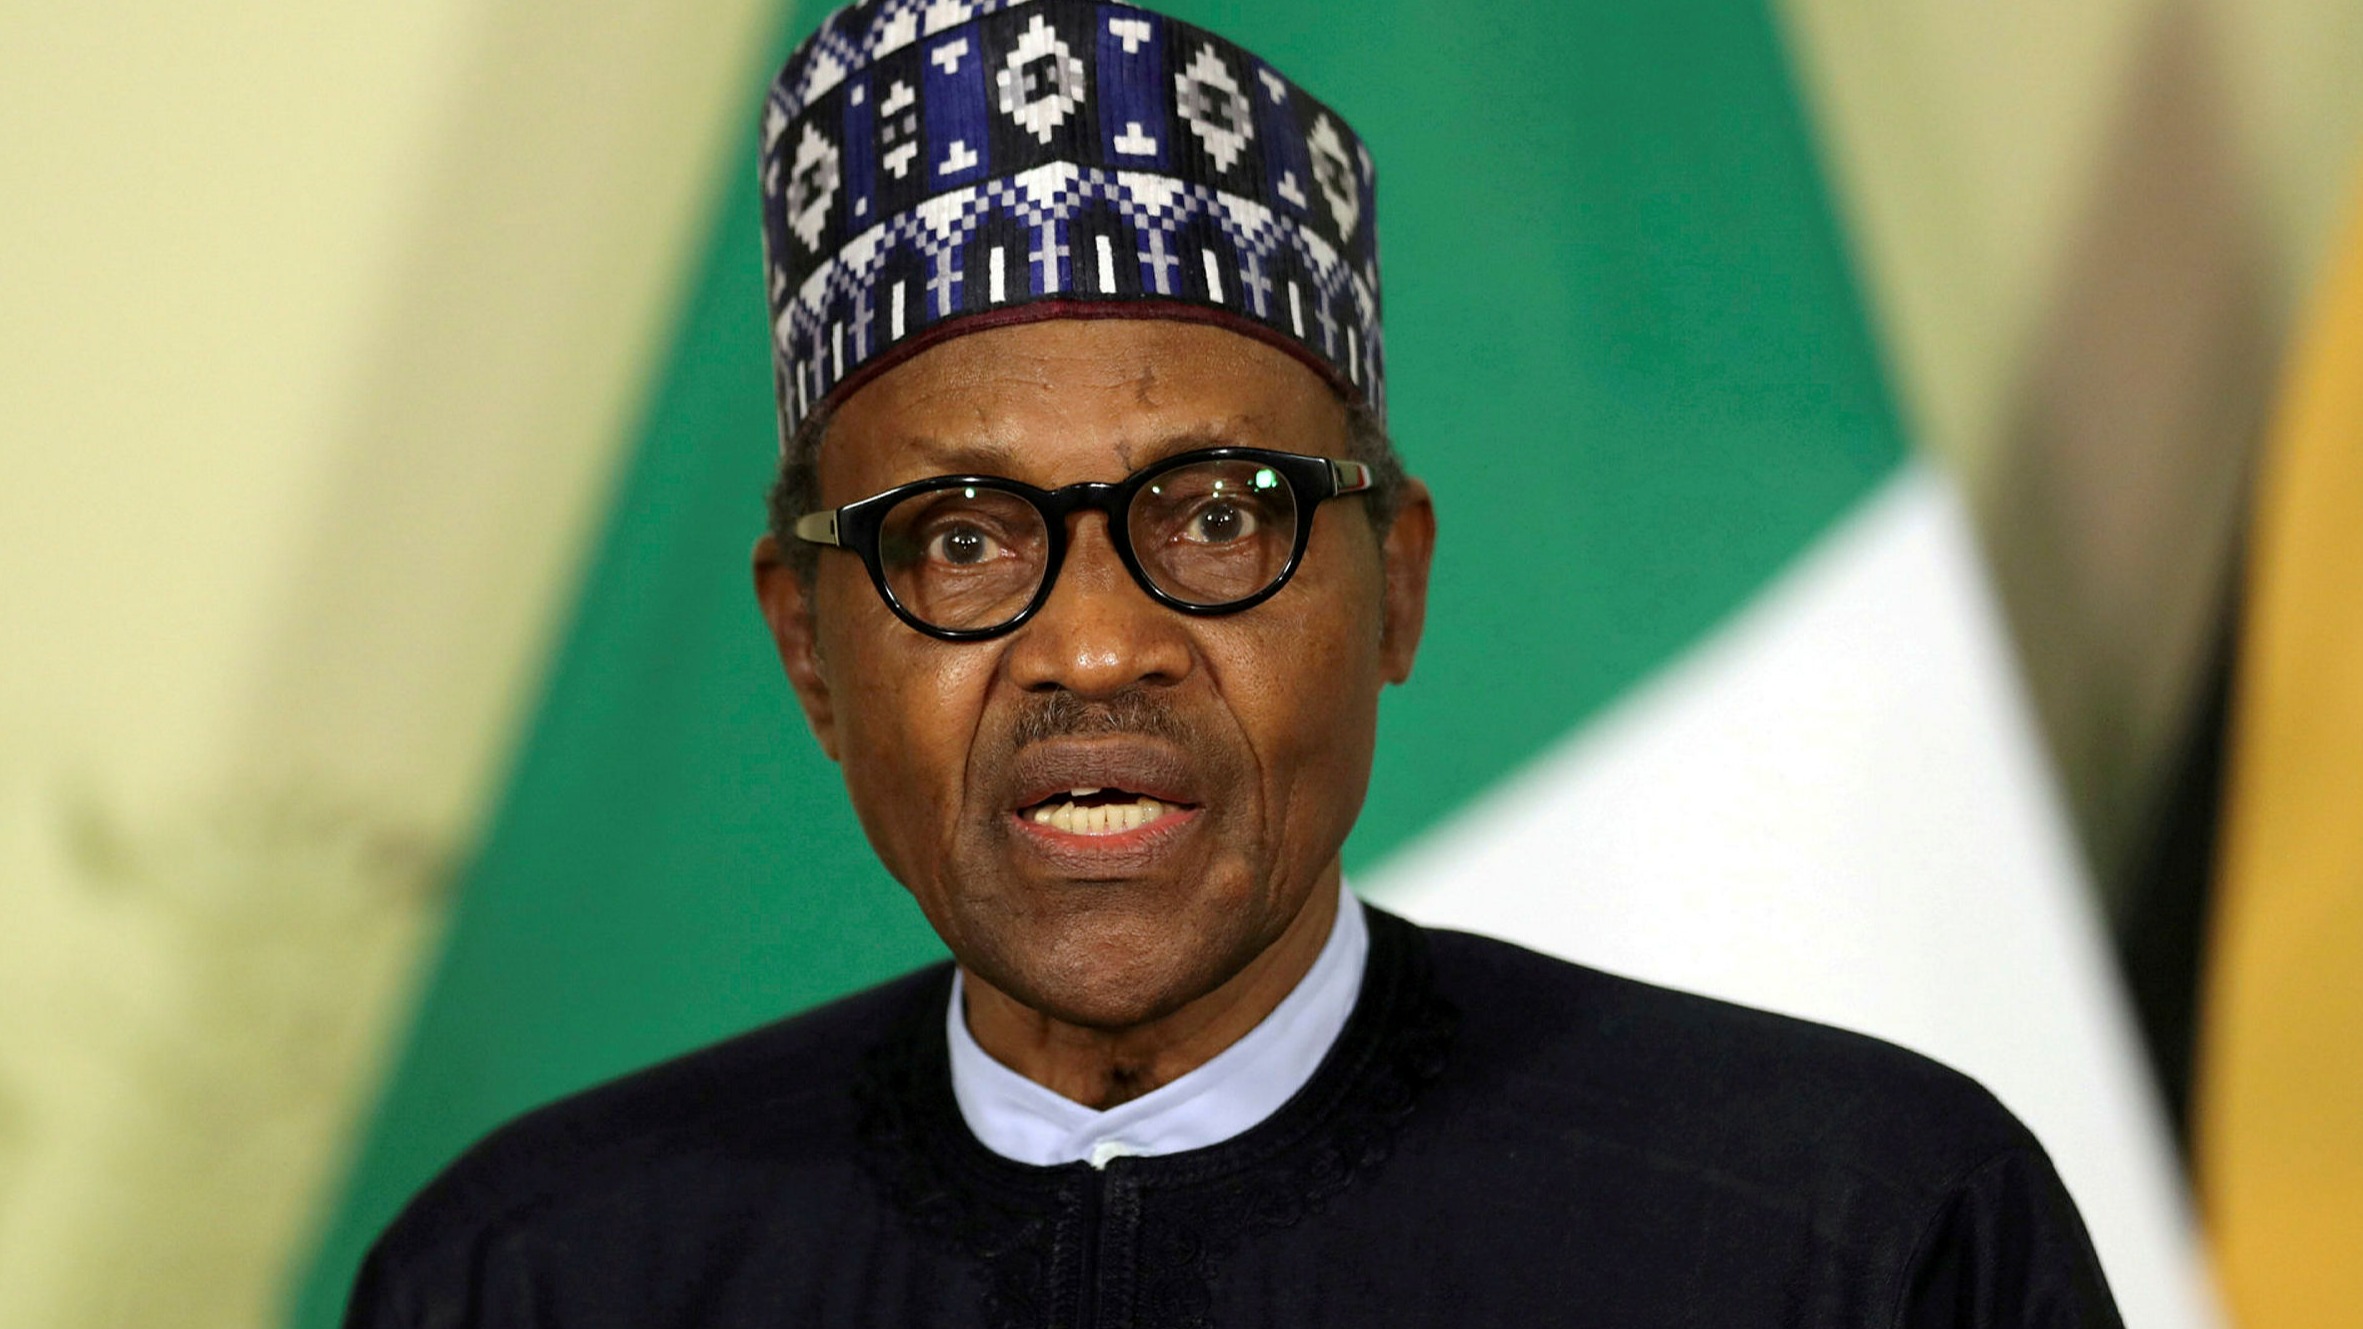 Buhari: I’m Doing My Best But It’s Not Good Enough